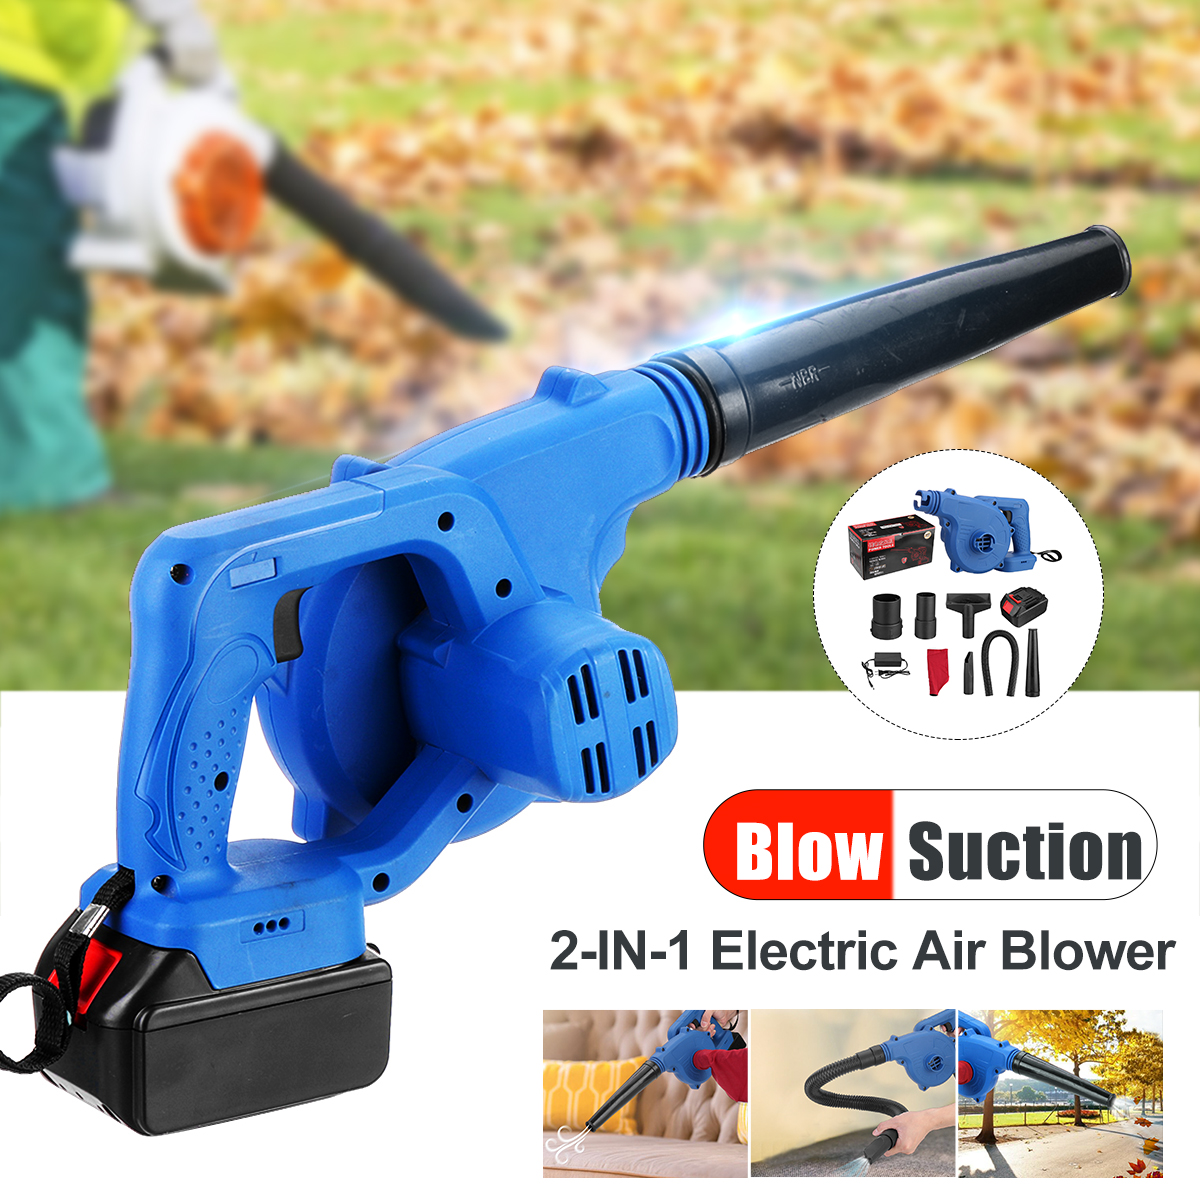 2-IN-1-Electric-Air-Blower-Kit-Cleaner-Wireless-Air-Fan-Dust-Blowing-Computer-Dust-Collector-Adapted-1838499-2